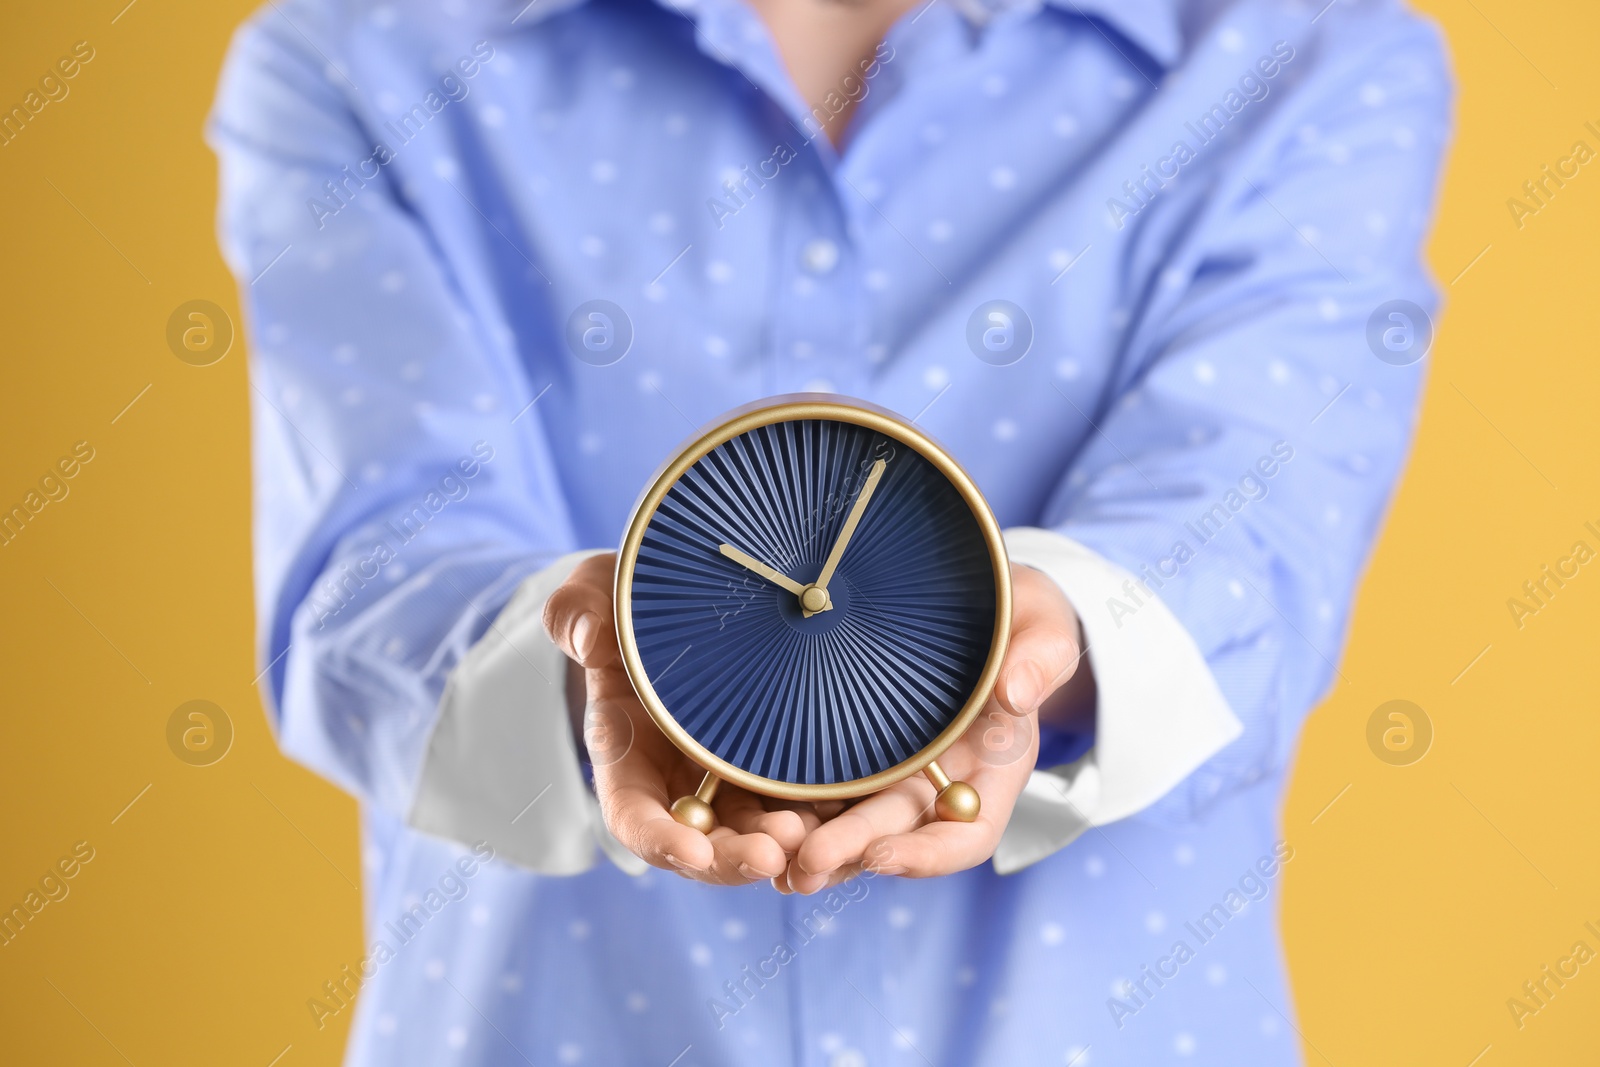 Photo of Young woman holding alarm clock on color background. Time concept